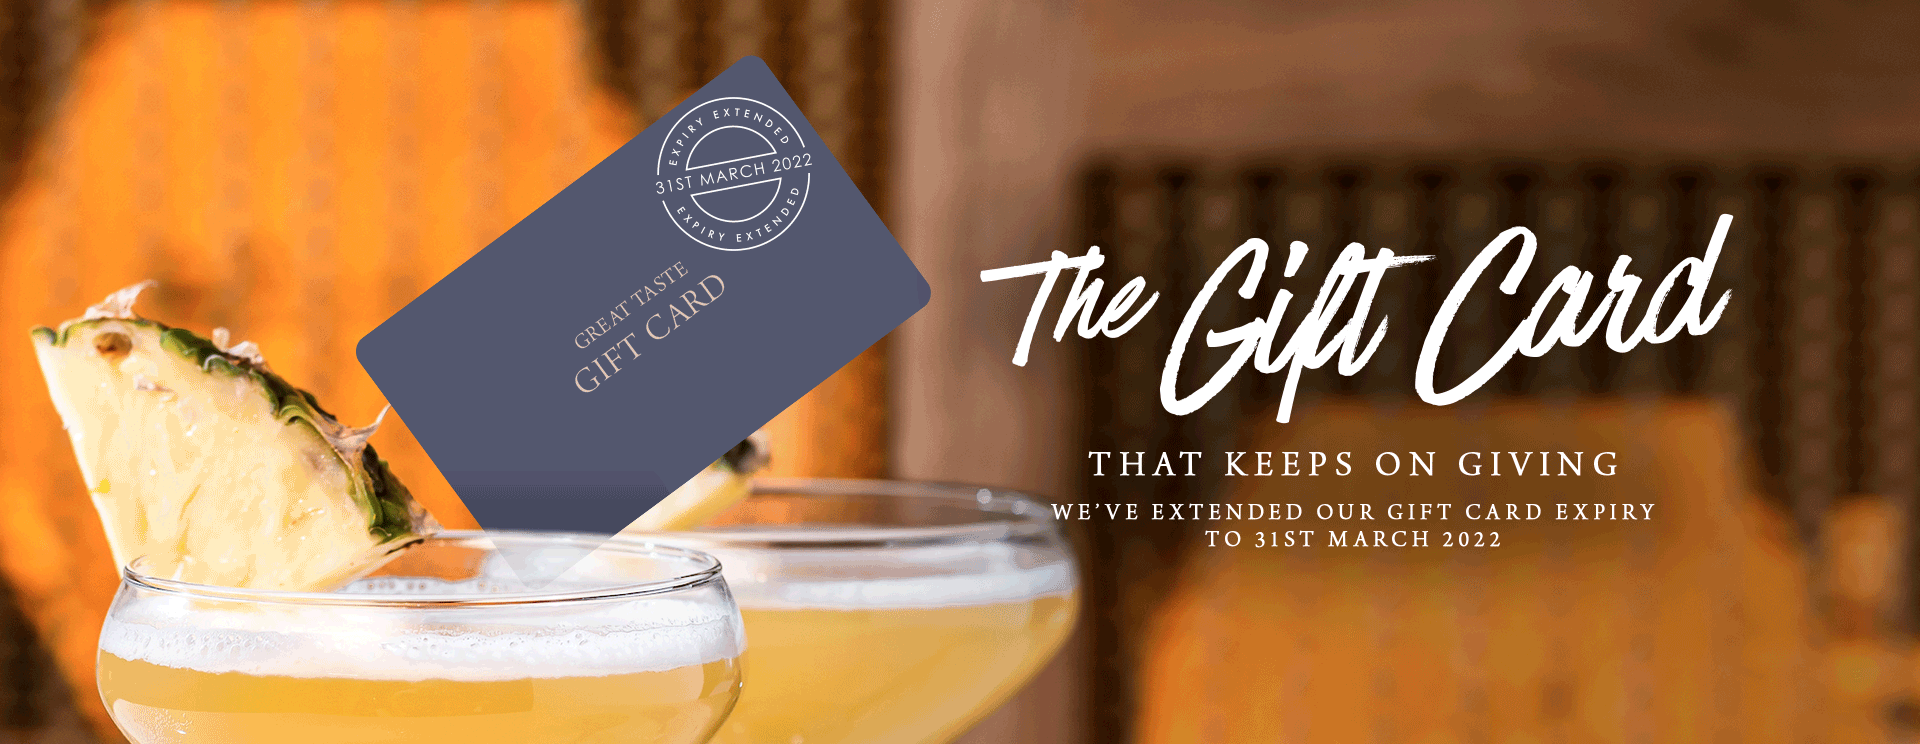 Give the gift of a gift card at The Langton